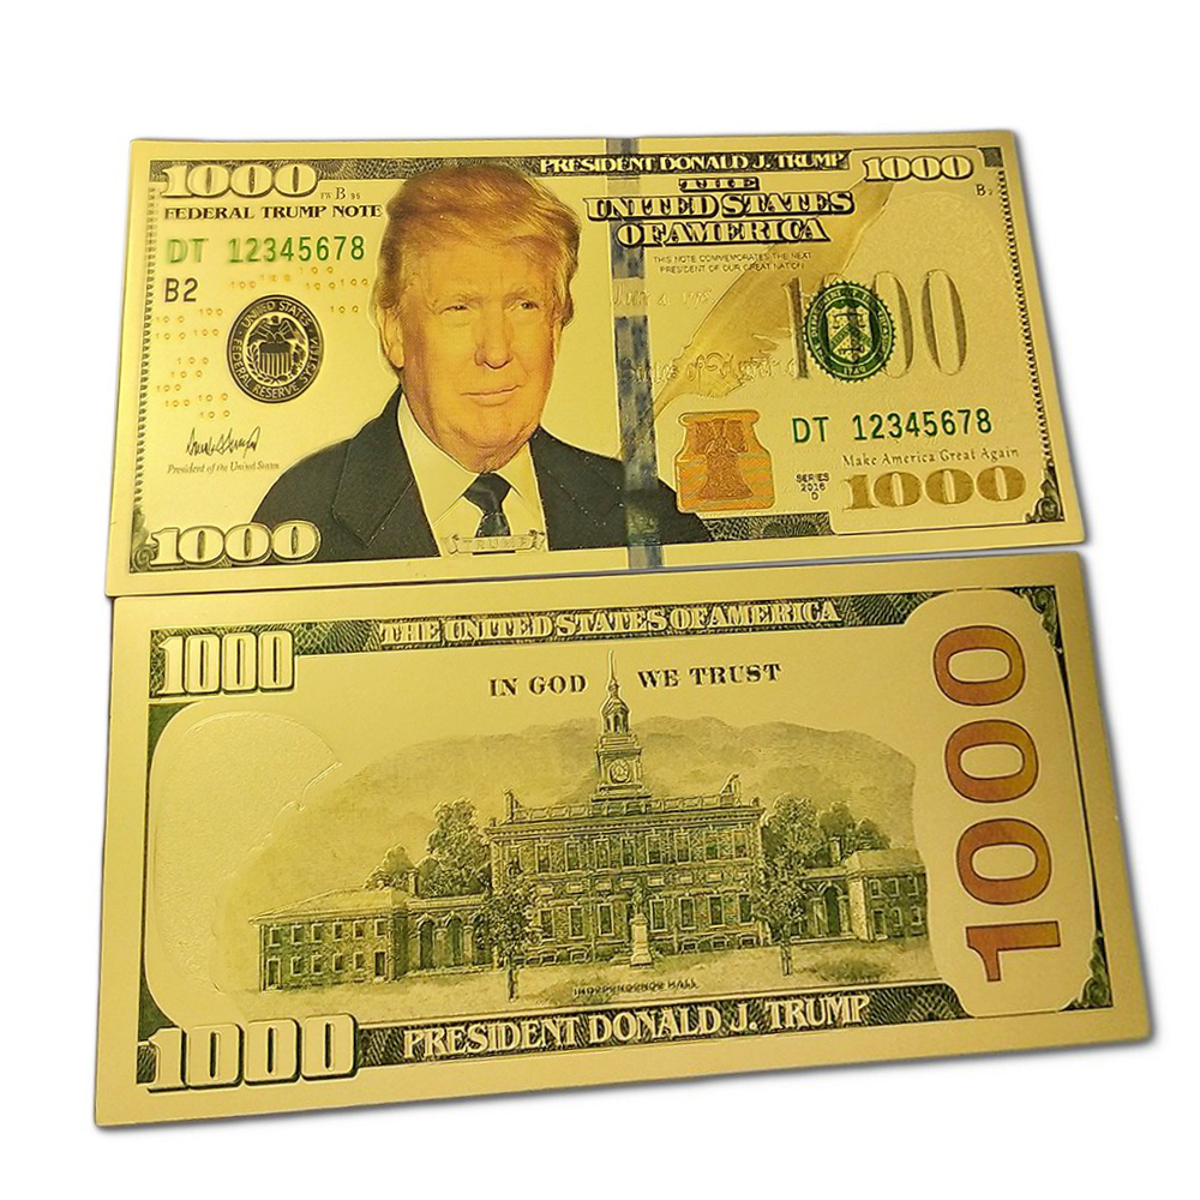 1000 USD Commemorative President Donald Trump Collectible Gold Plated Fake Bank Note